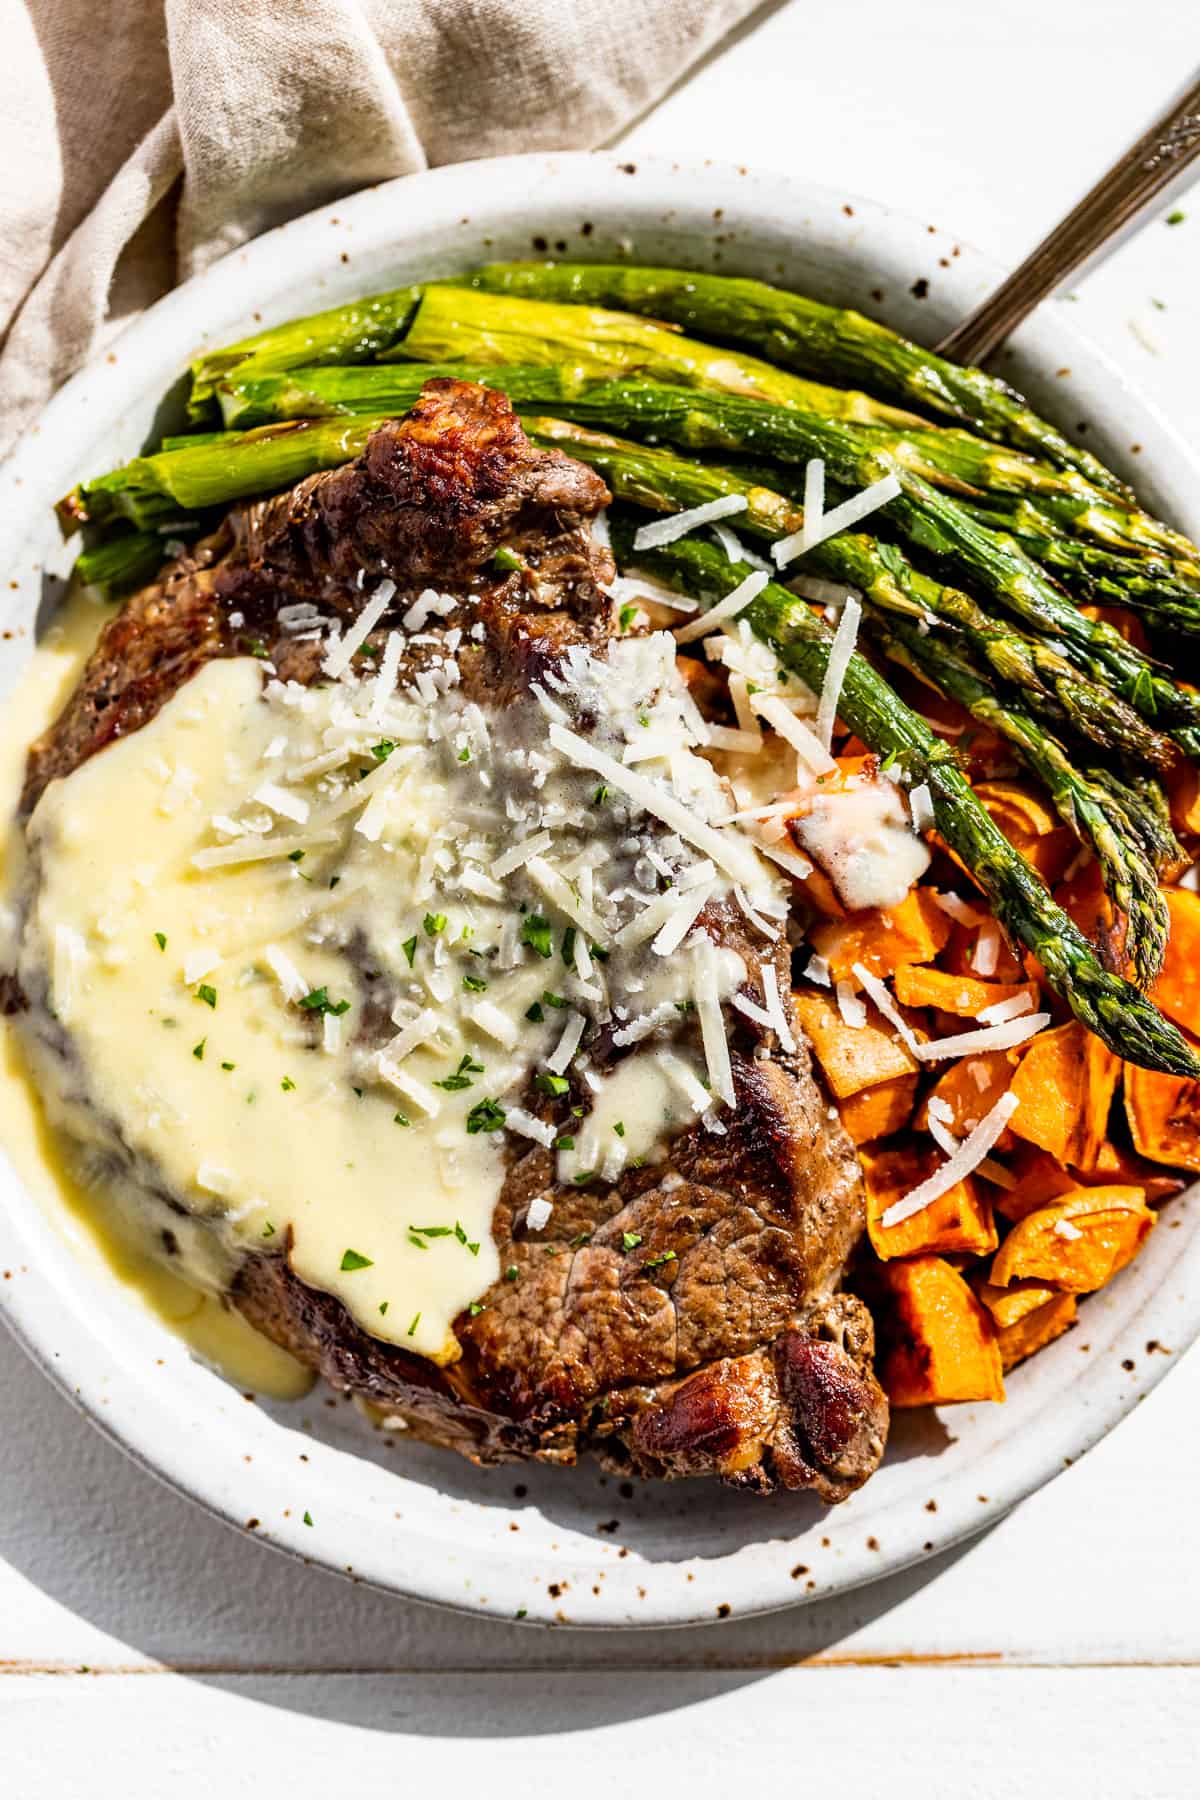 Garlic Parmesan Sauce drizzled over a ribeye steak with roasted sweet potatoes and asparagus on the side sprinkled with parmesan.